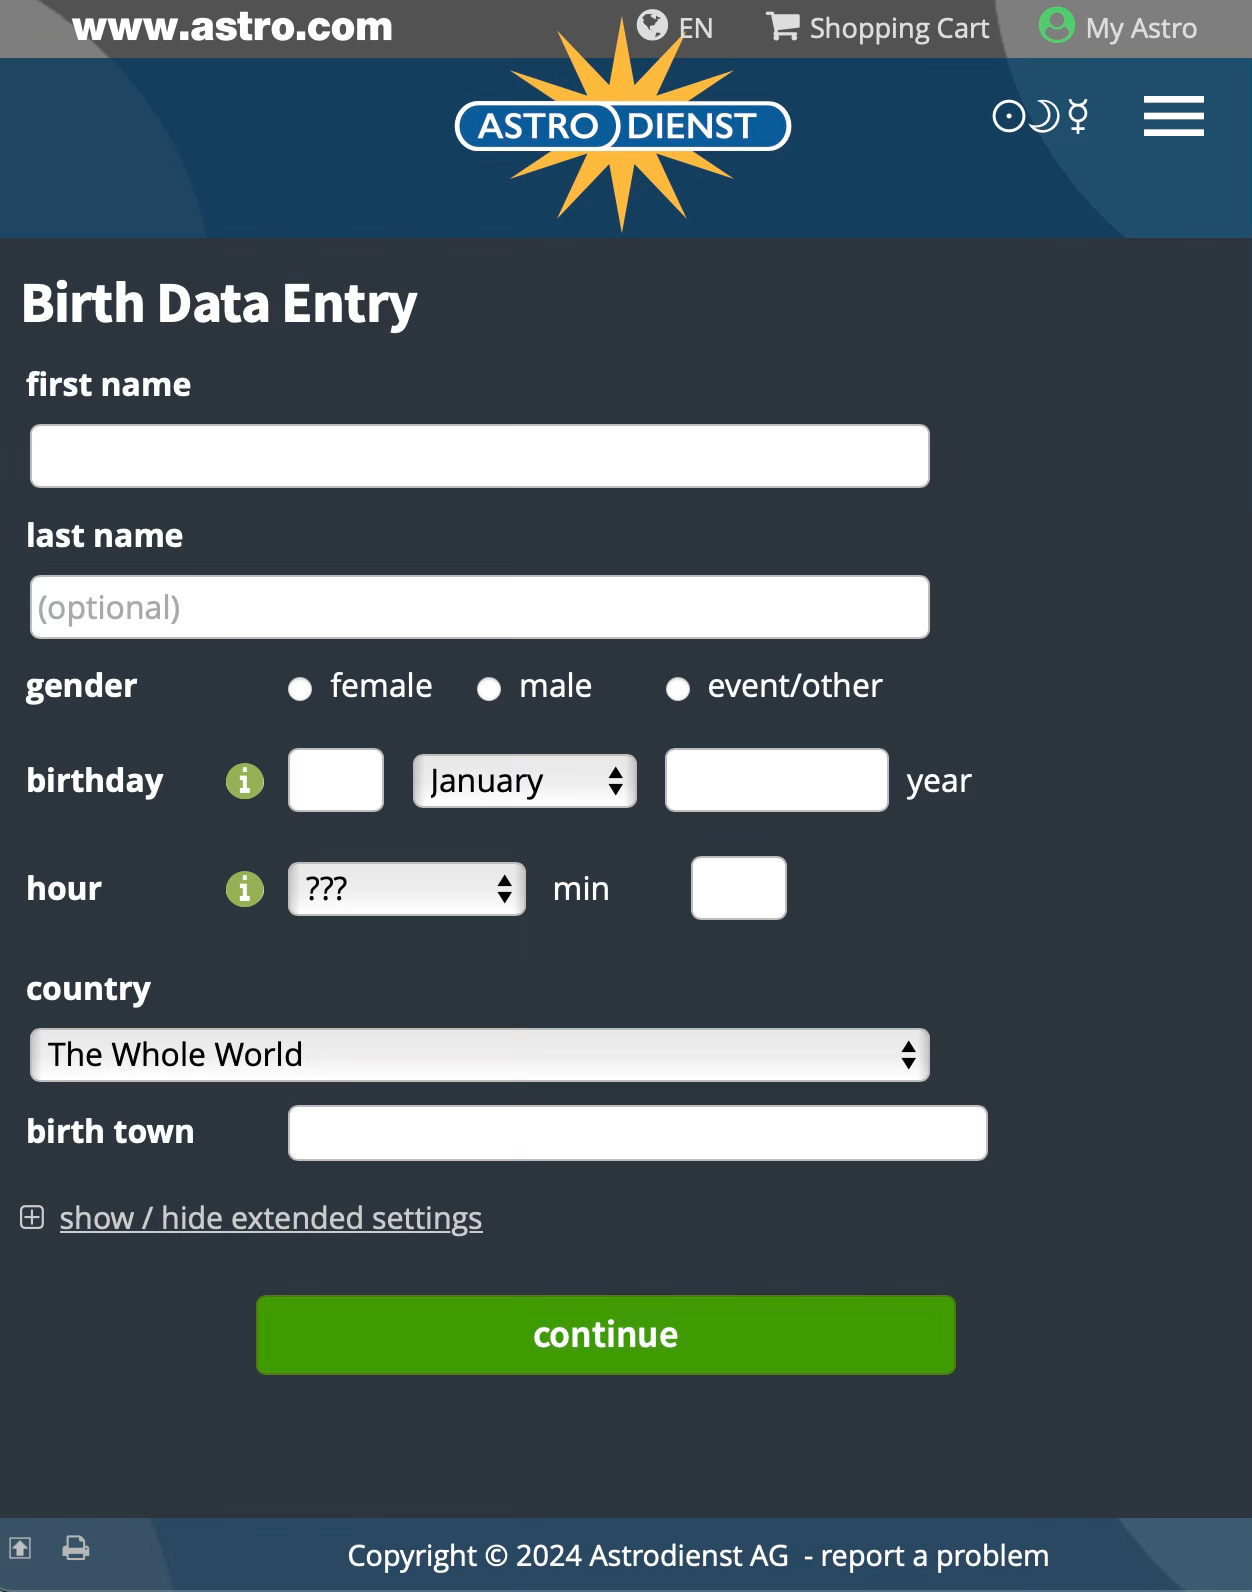 view of the page where you will enter your birth information on astro.com